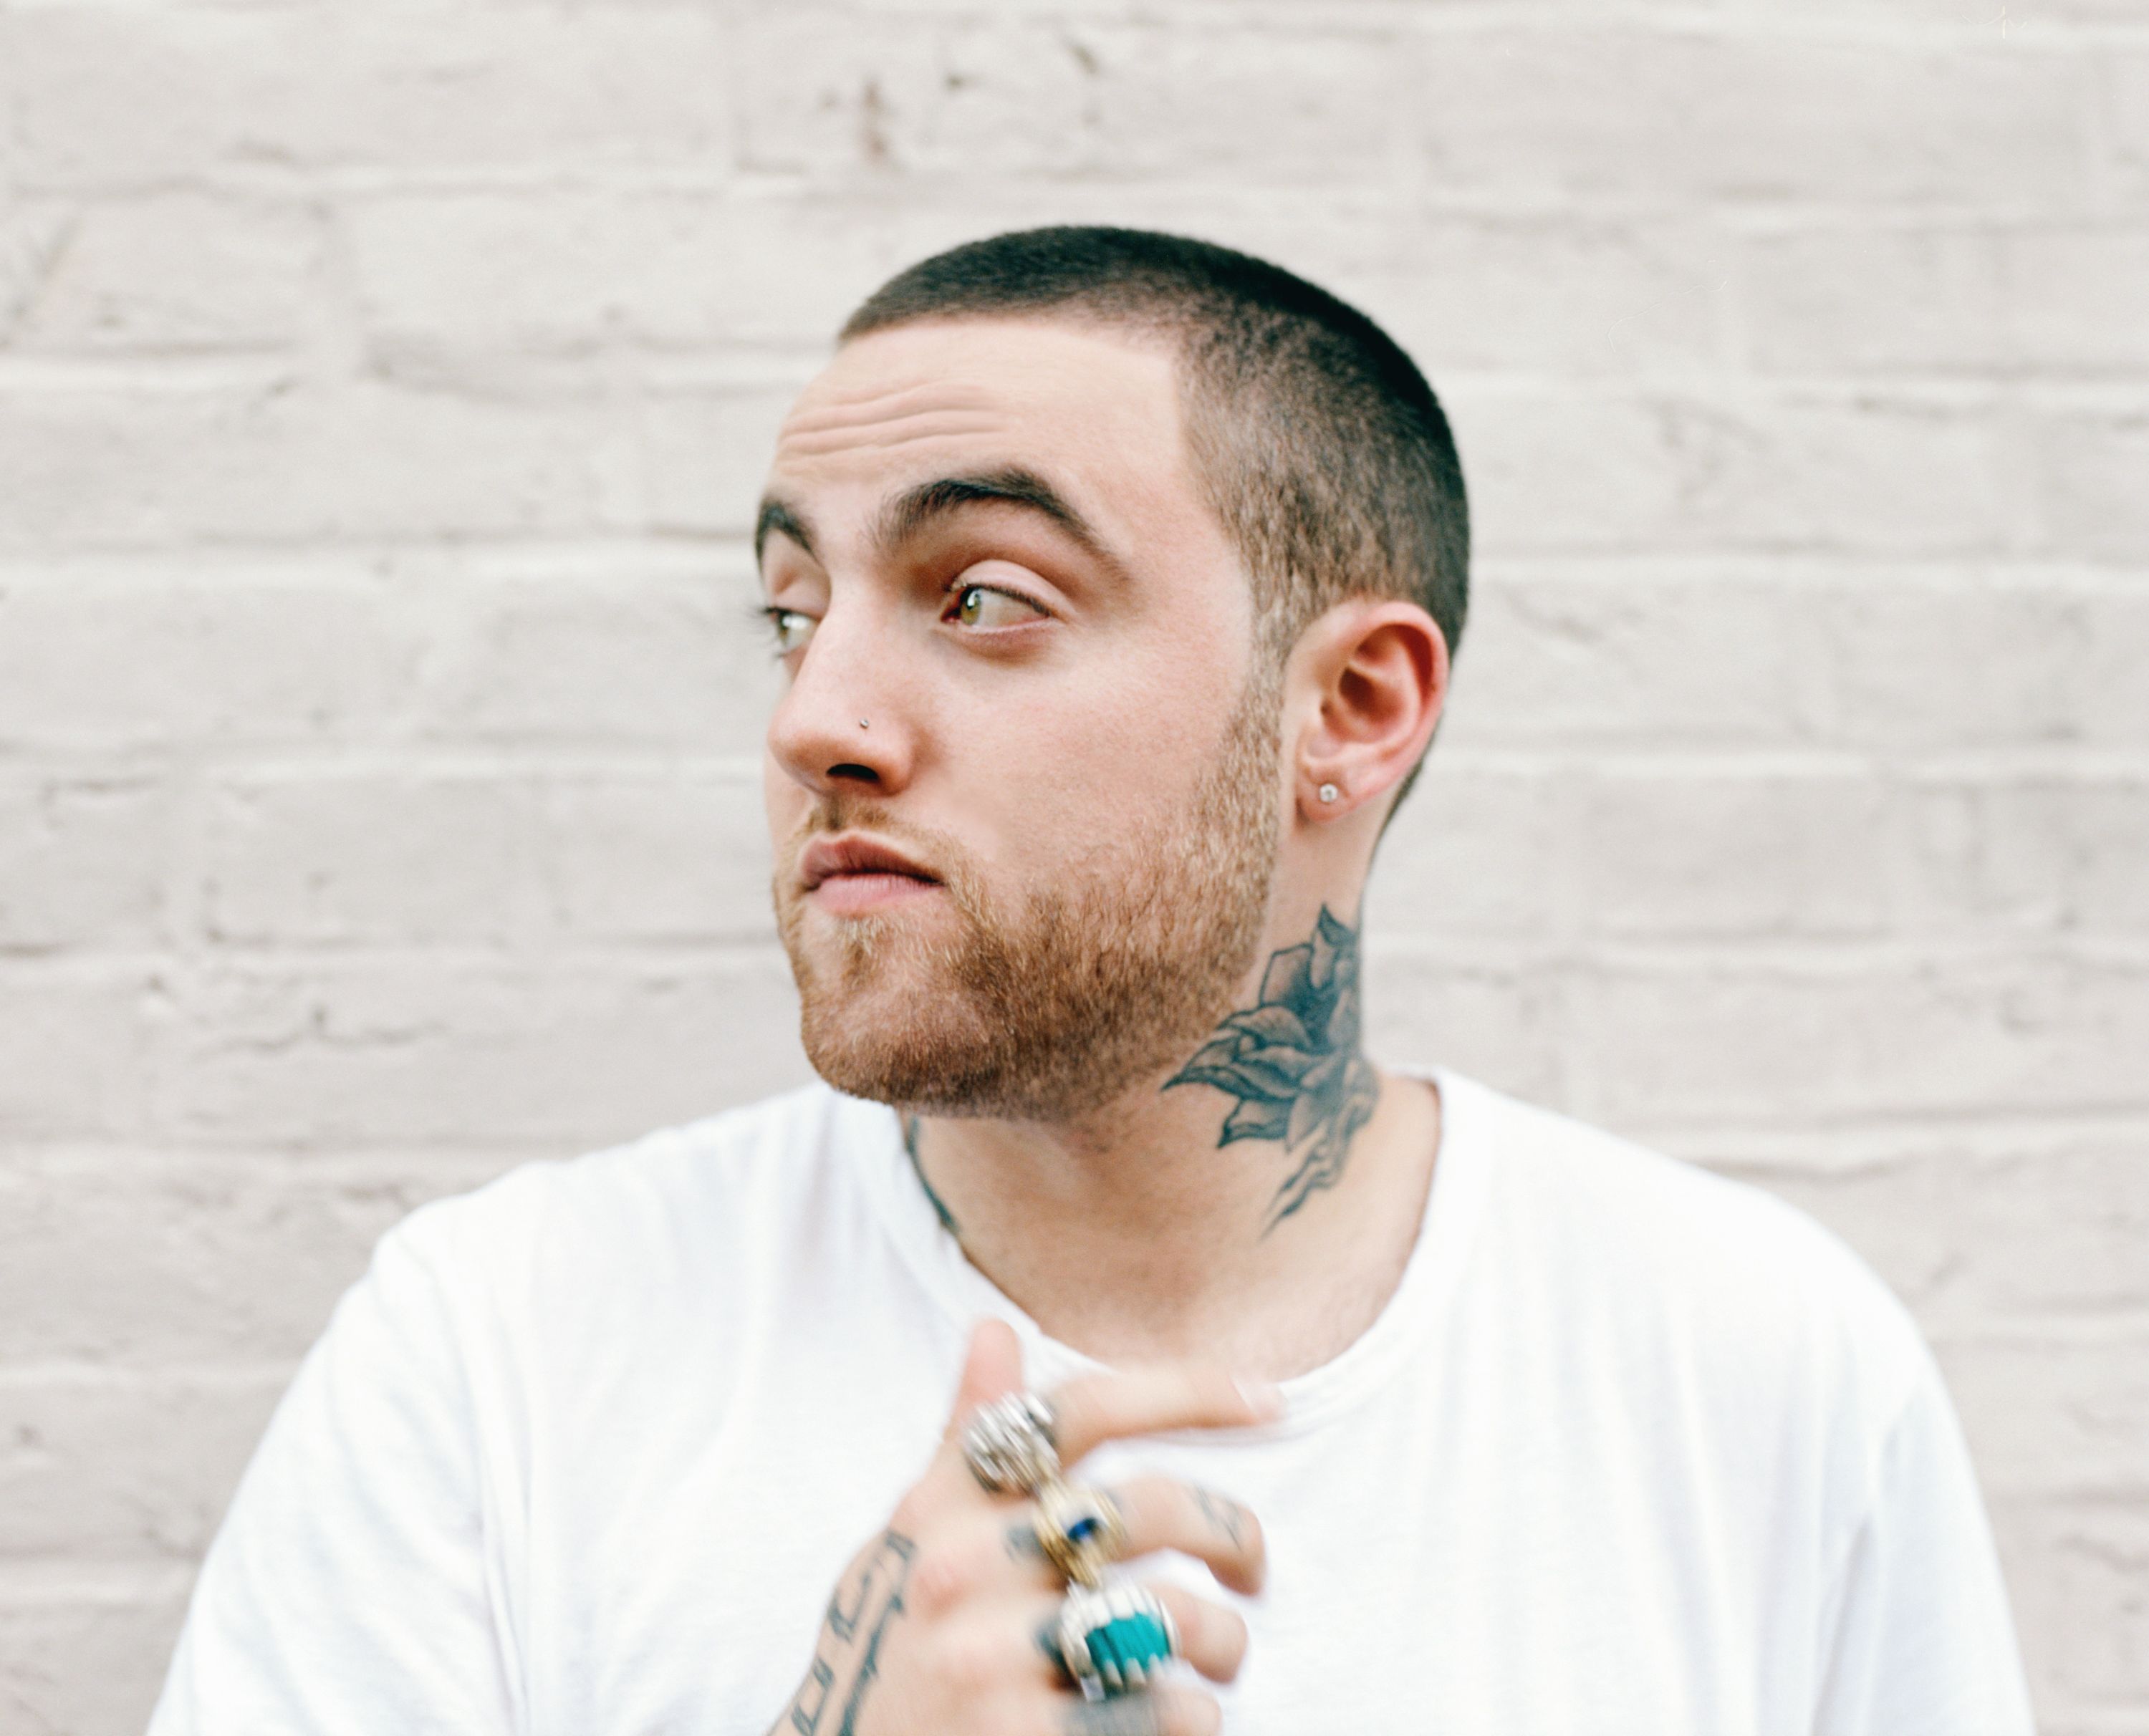 6 Celebrities with Tattoos for Mac Miller Lil Peep and XXXTentacion   Tattoo Ideas Artists and Models